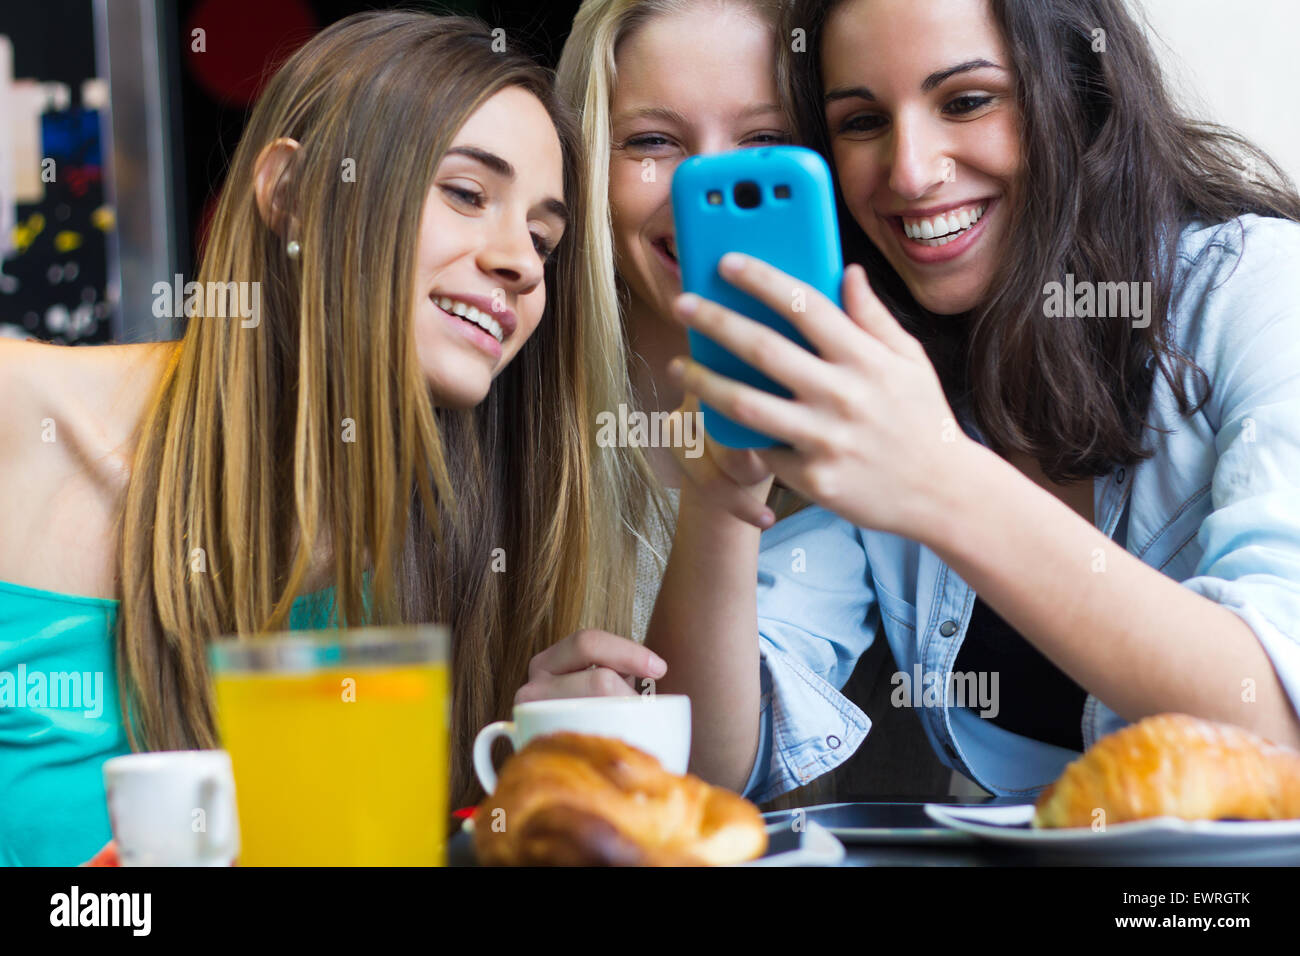 A group of friends having fun with smartphones Stock Photo - Alamy